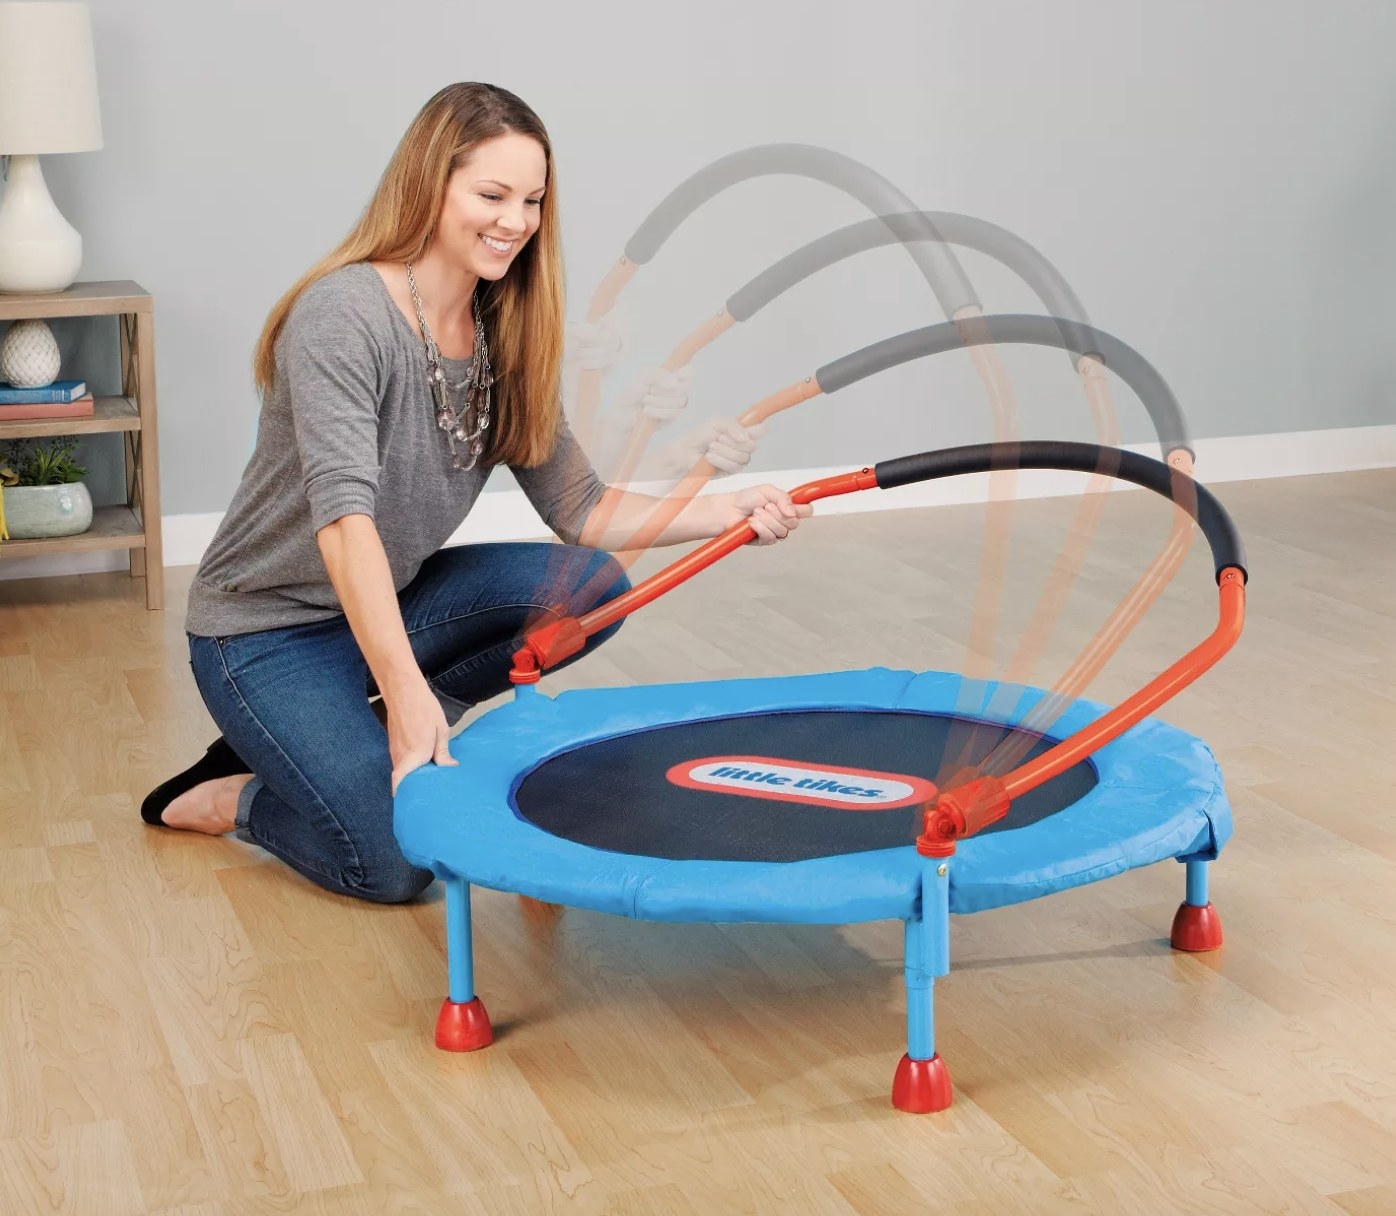 A person setting up a small trampoline